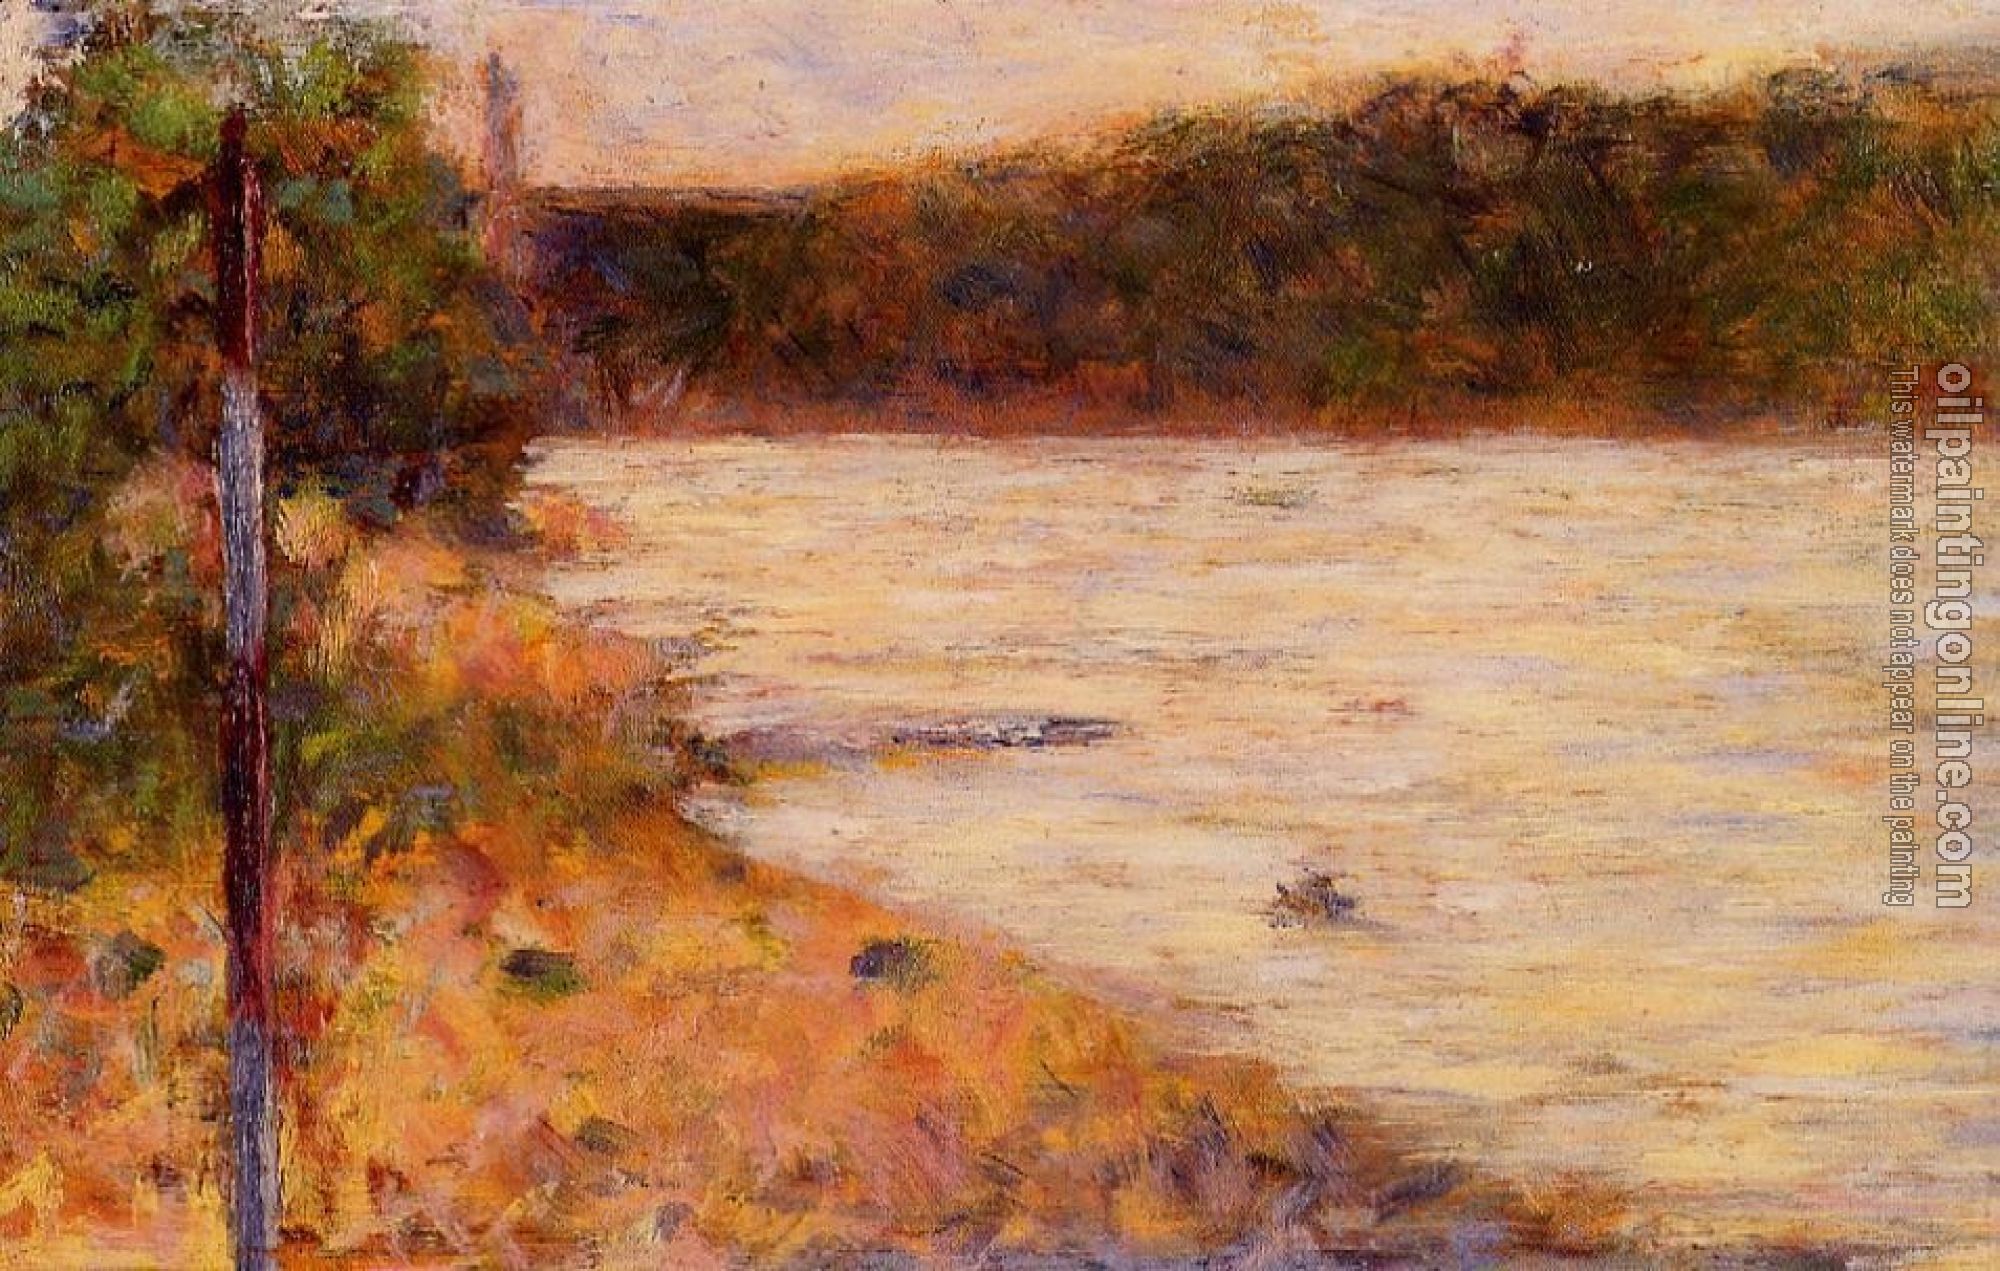 Seurat, Georges - Bathing at Asnieres, Banks of a River